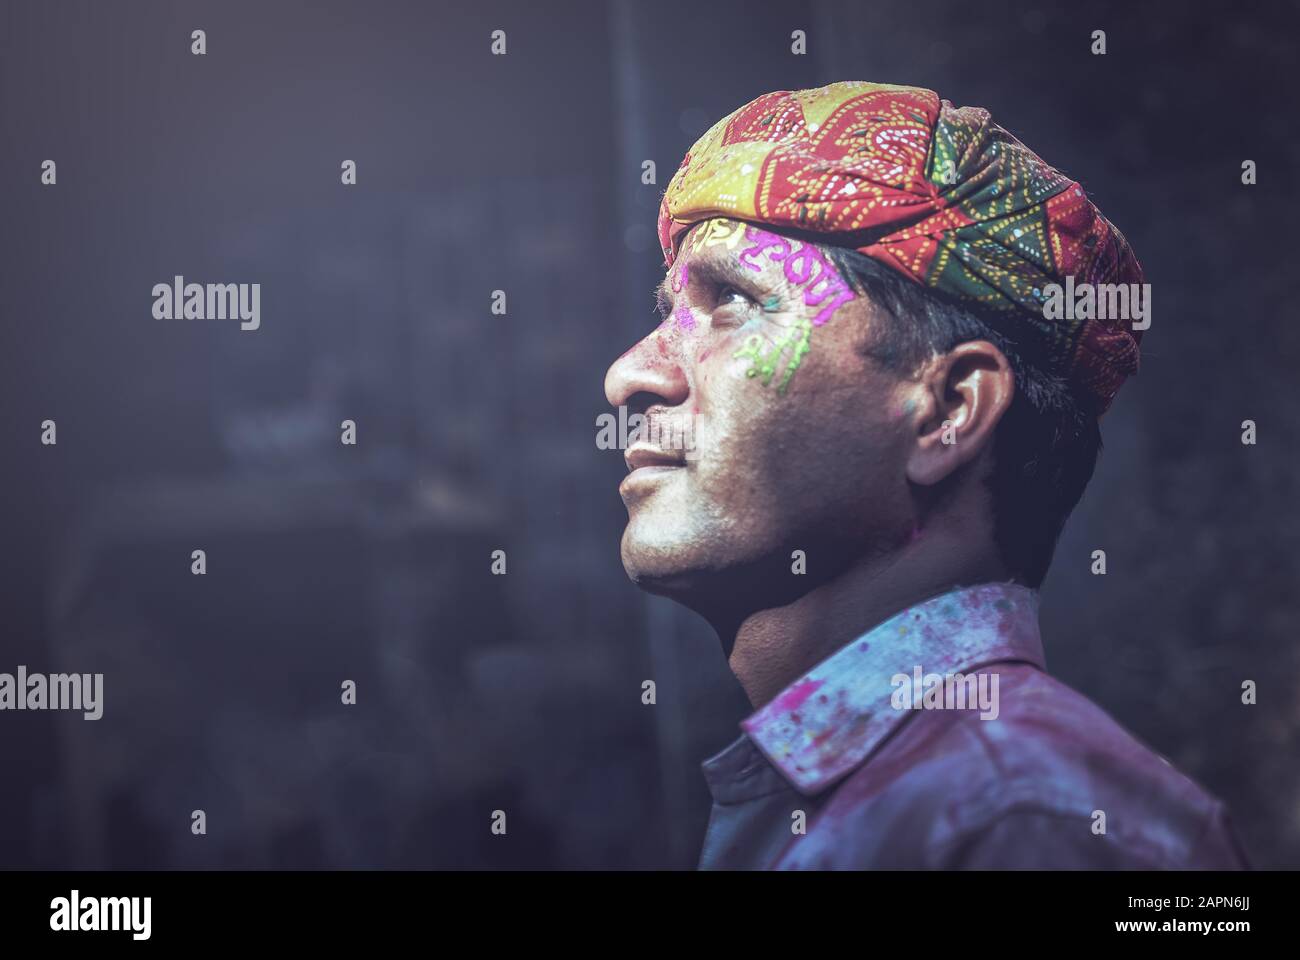 MATHURA, INDIA - Feburary 25,2018: Portrait of Indian man smeared with colours on her face poses for a photograph during the Holi festival celebration Stock Photo